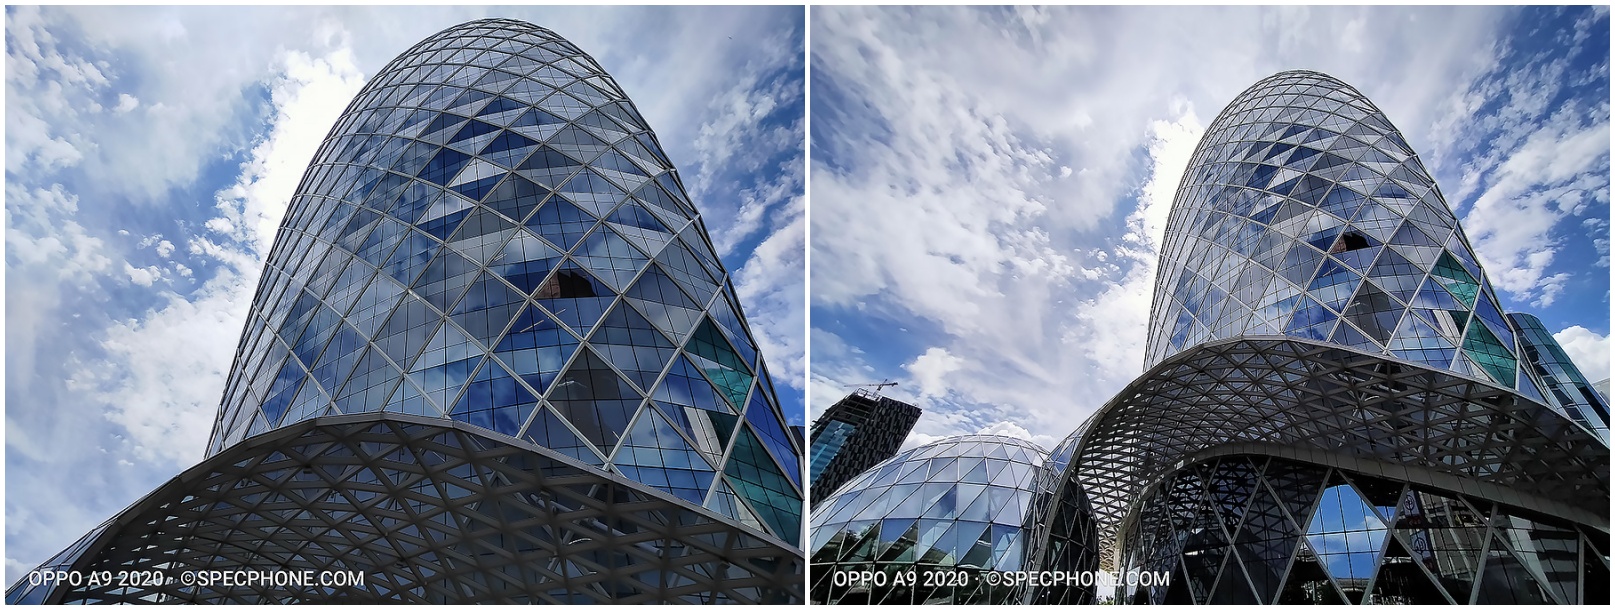 Shot on OPPO A9 2020 SpecPhone Ultra wide vs normal 002